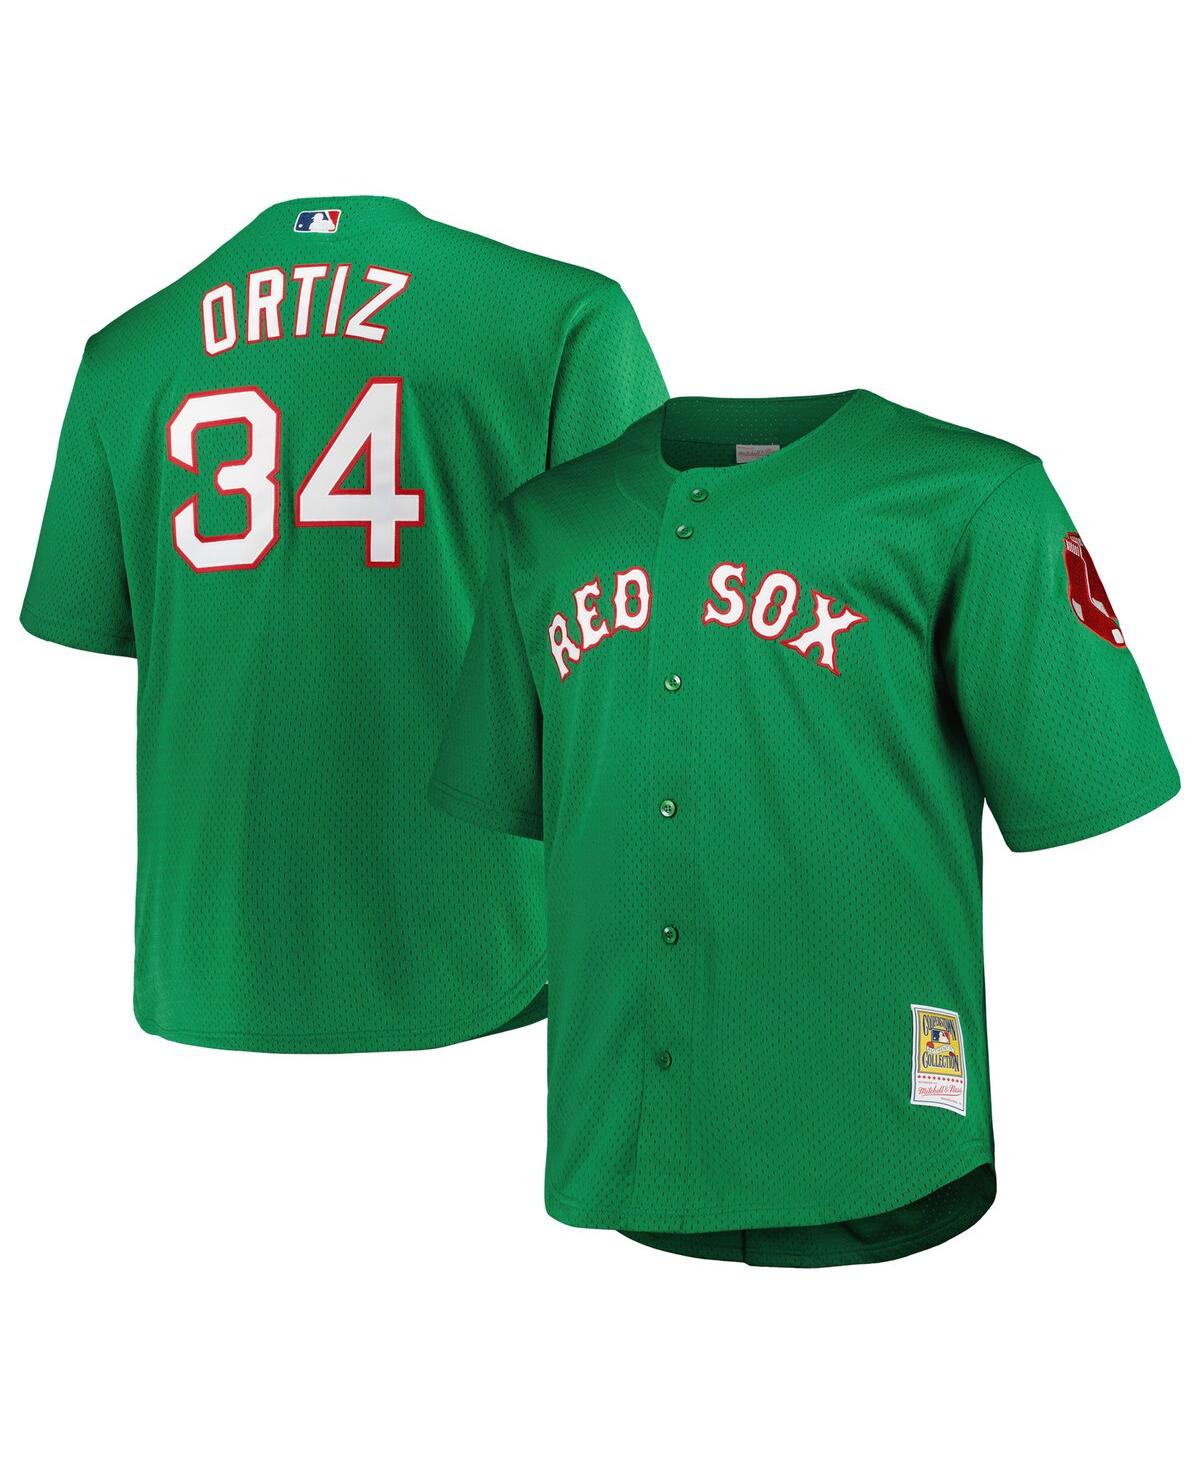 Men's David Ortiz Kelly Green Boston Red Sox Big Tall Cooperstown Collection Mesh Batting Practice Jersey - Kelly Green